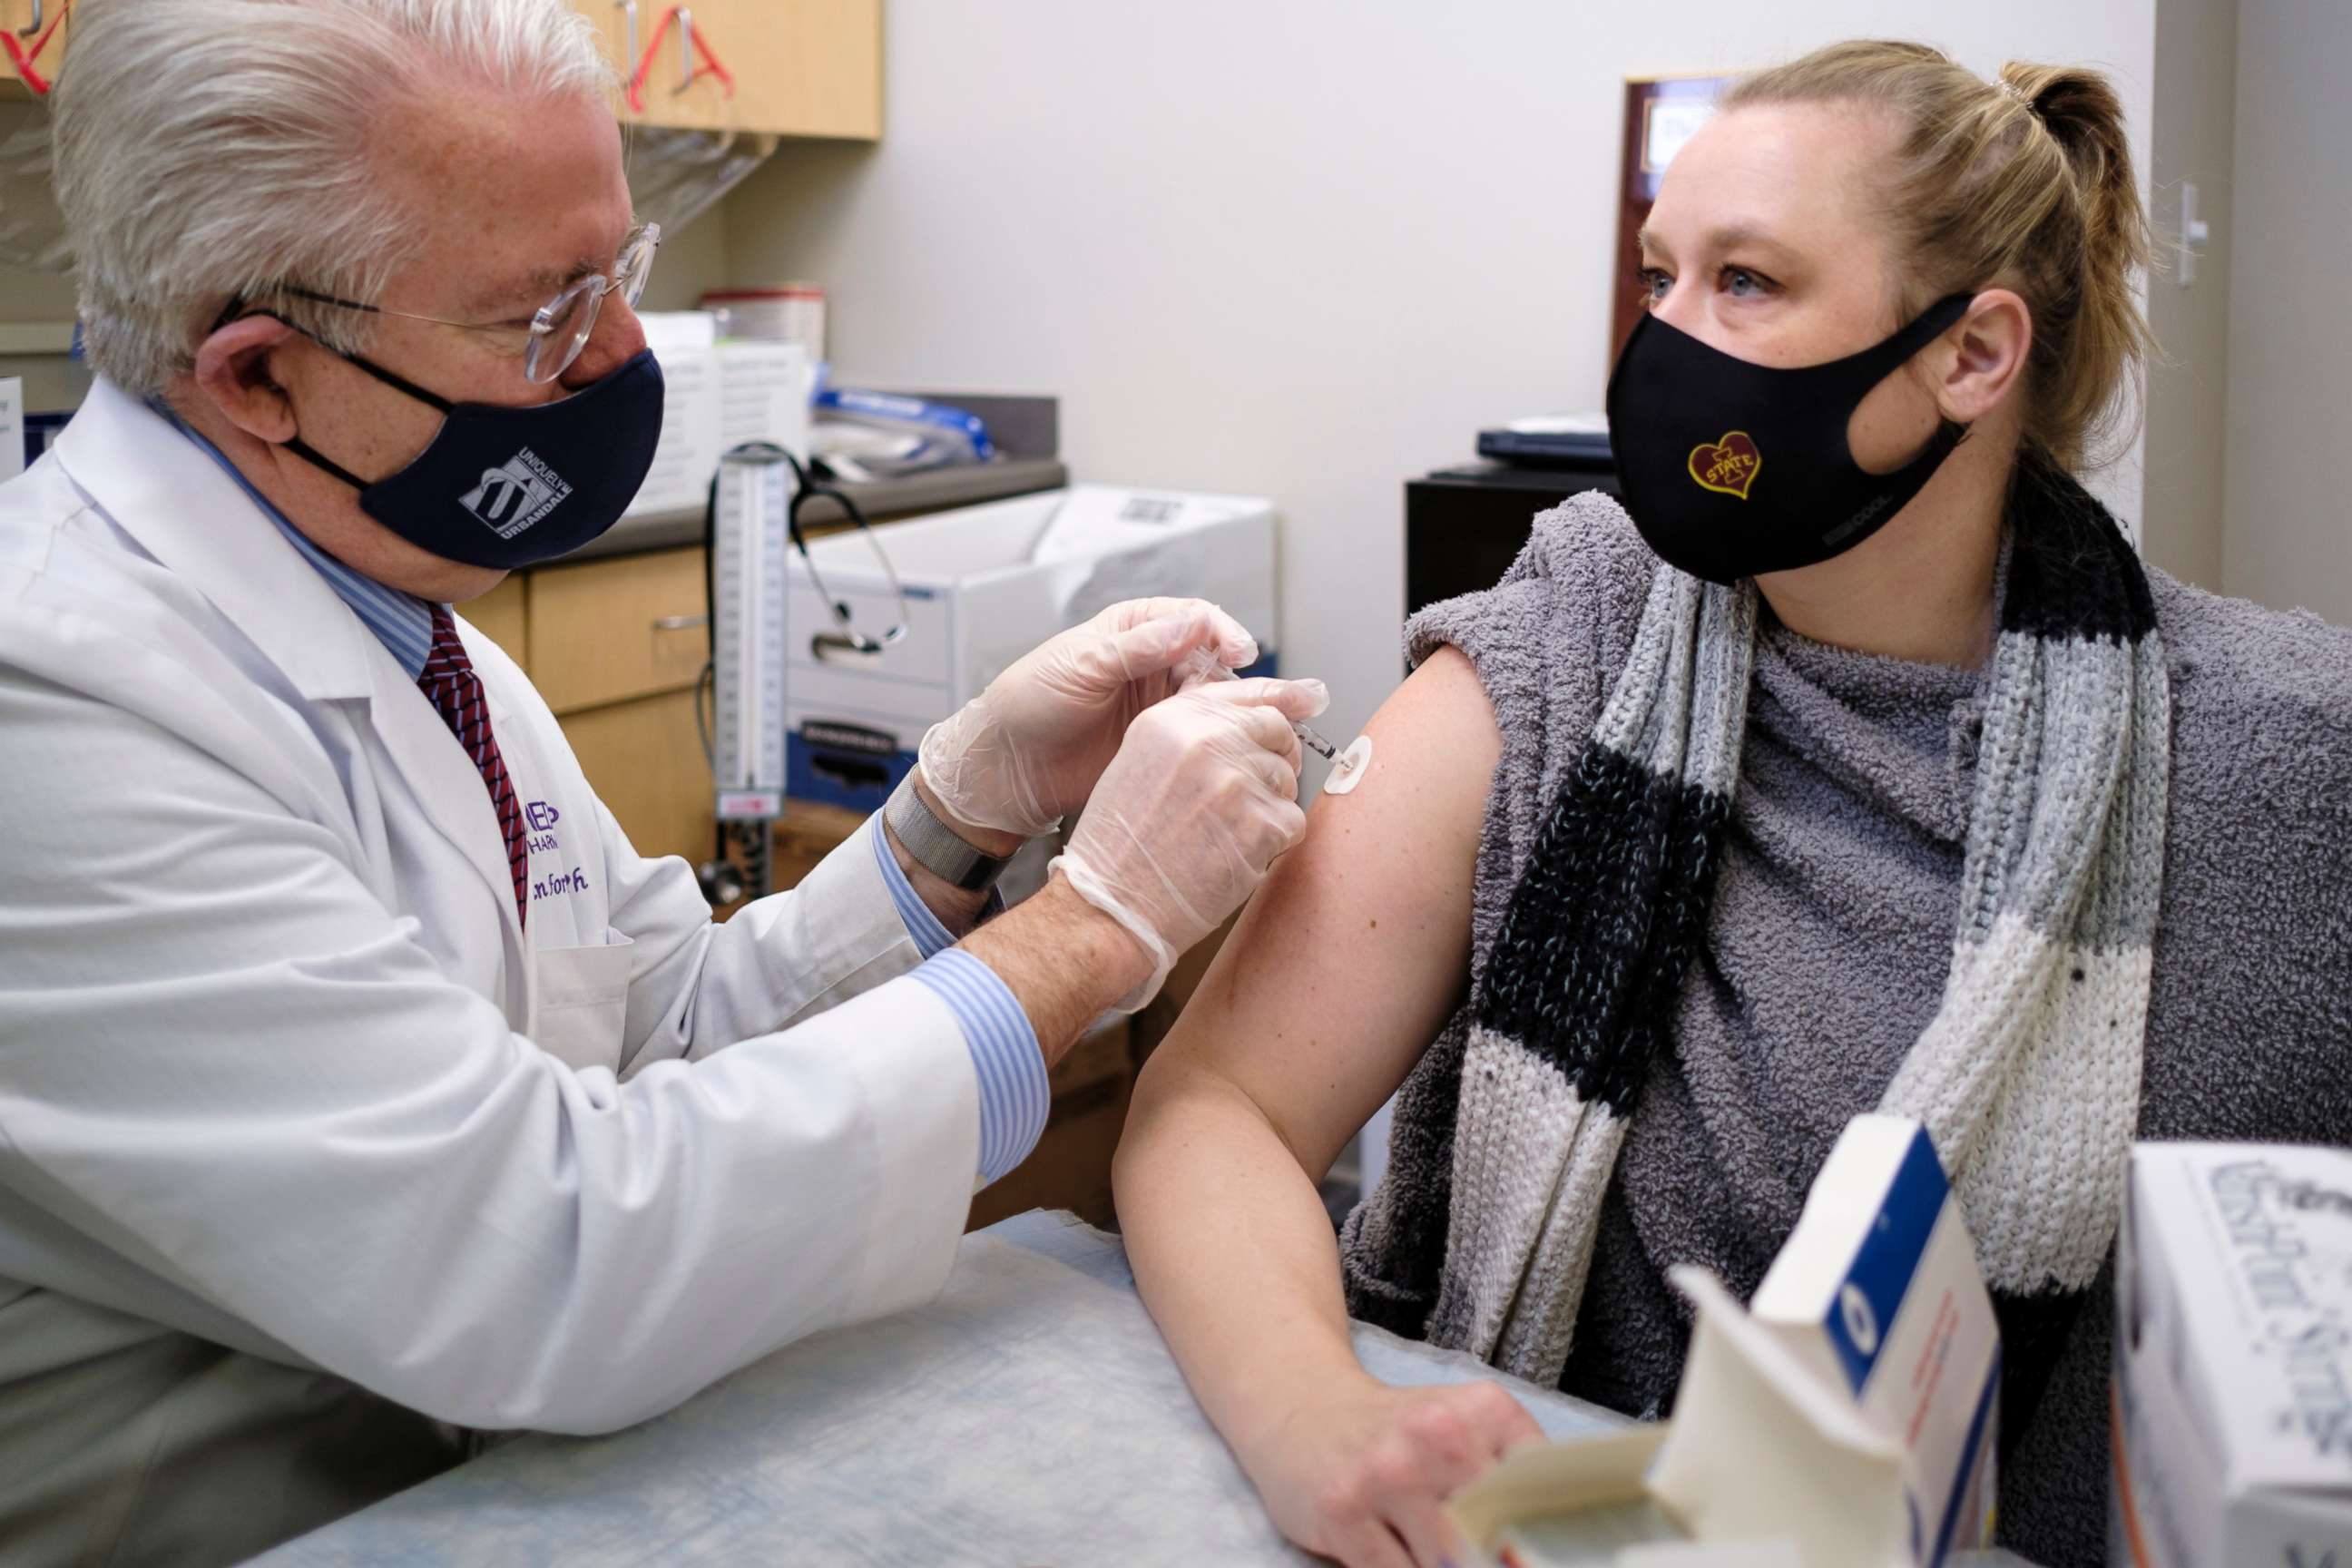 PHOTO: Pharmacist John Forbes gives the Moderna GOVID-19 vaccine to Meghan Bohlander, a physician's assistant, at the Medicap Pharmacy in Urbandale, Iowa, Jan. 5, 2021.